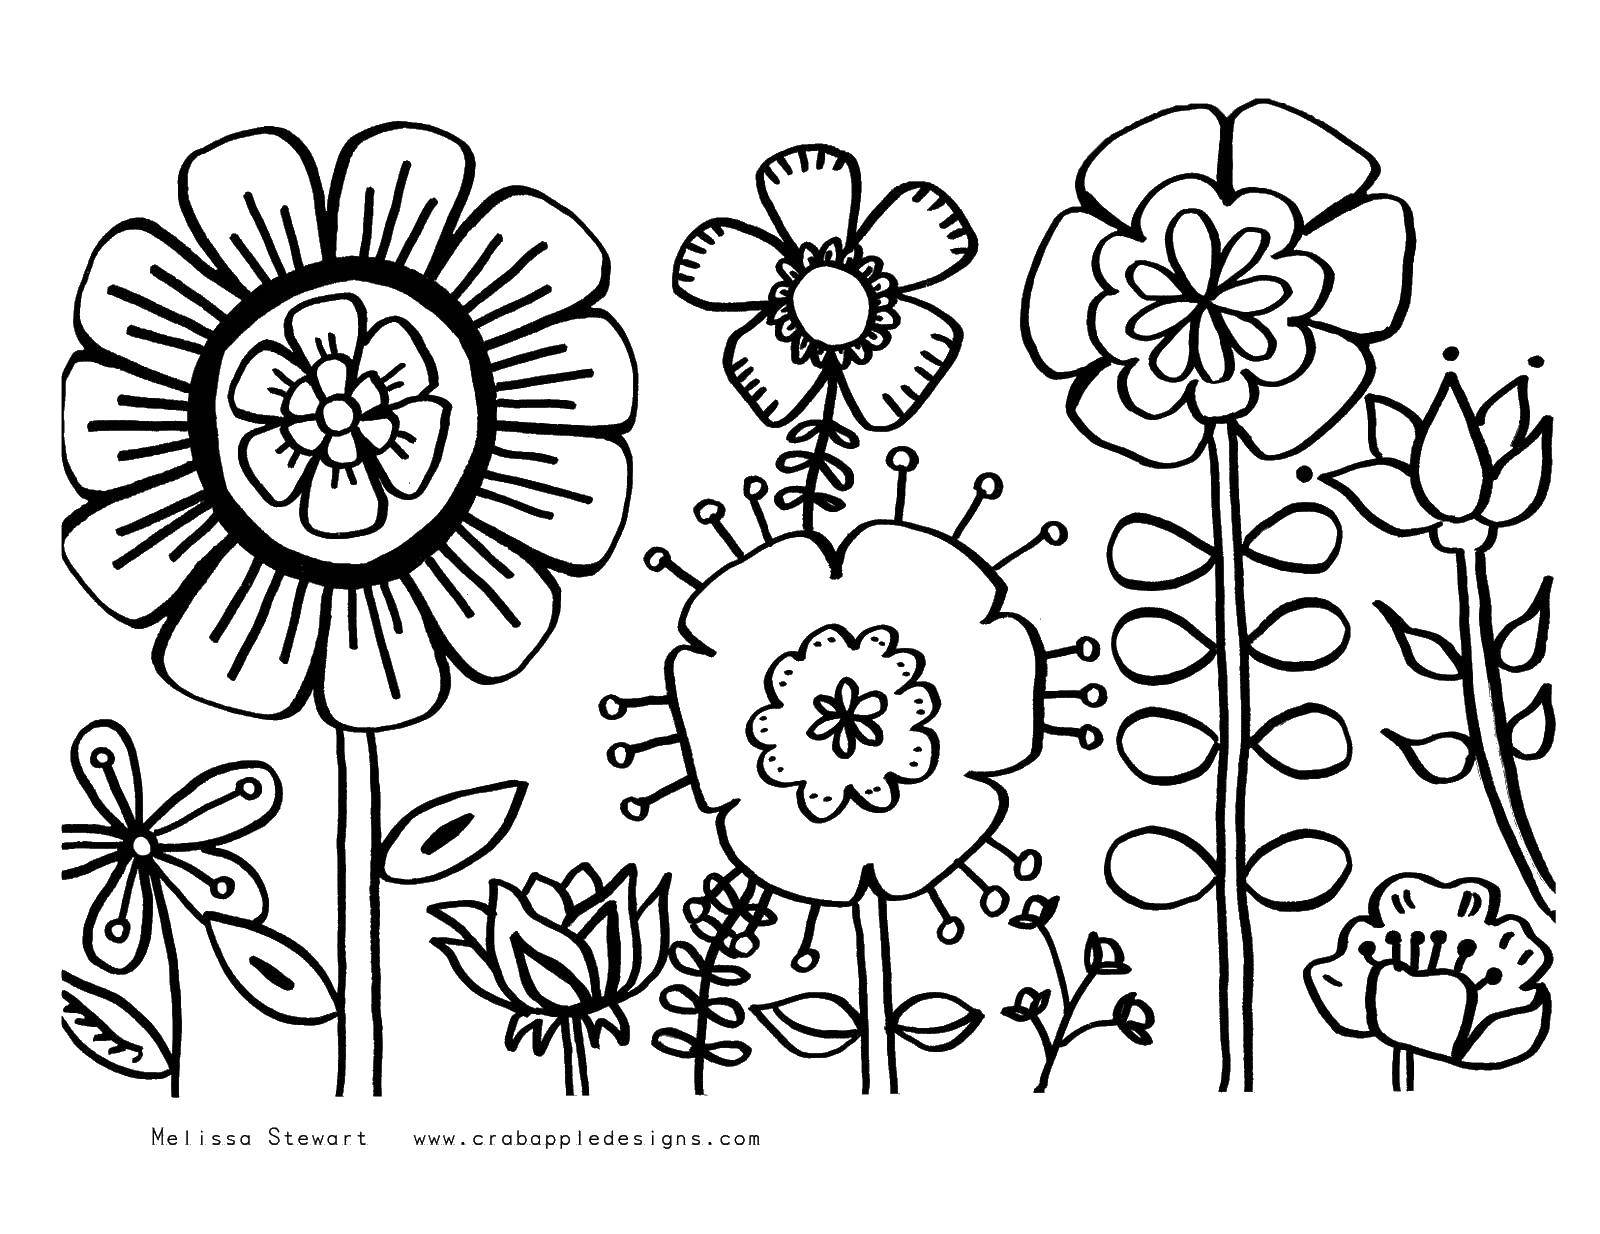 Coloring Different colors. Category Flowers. Tags:  flowers, plants.